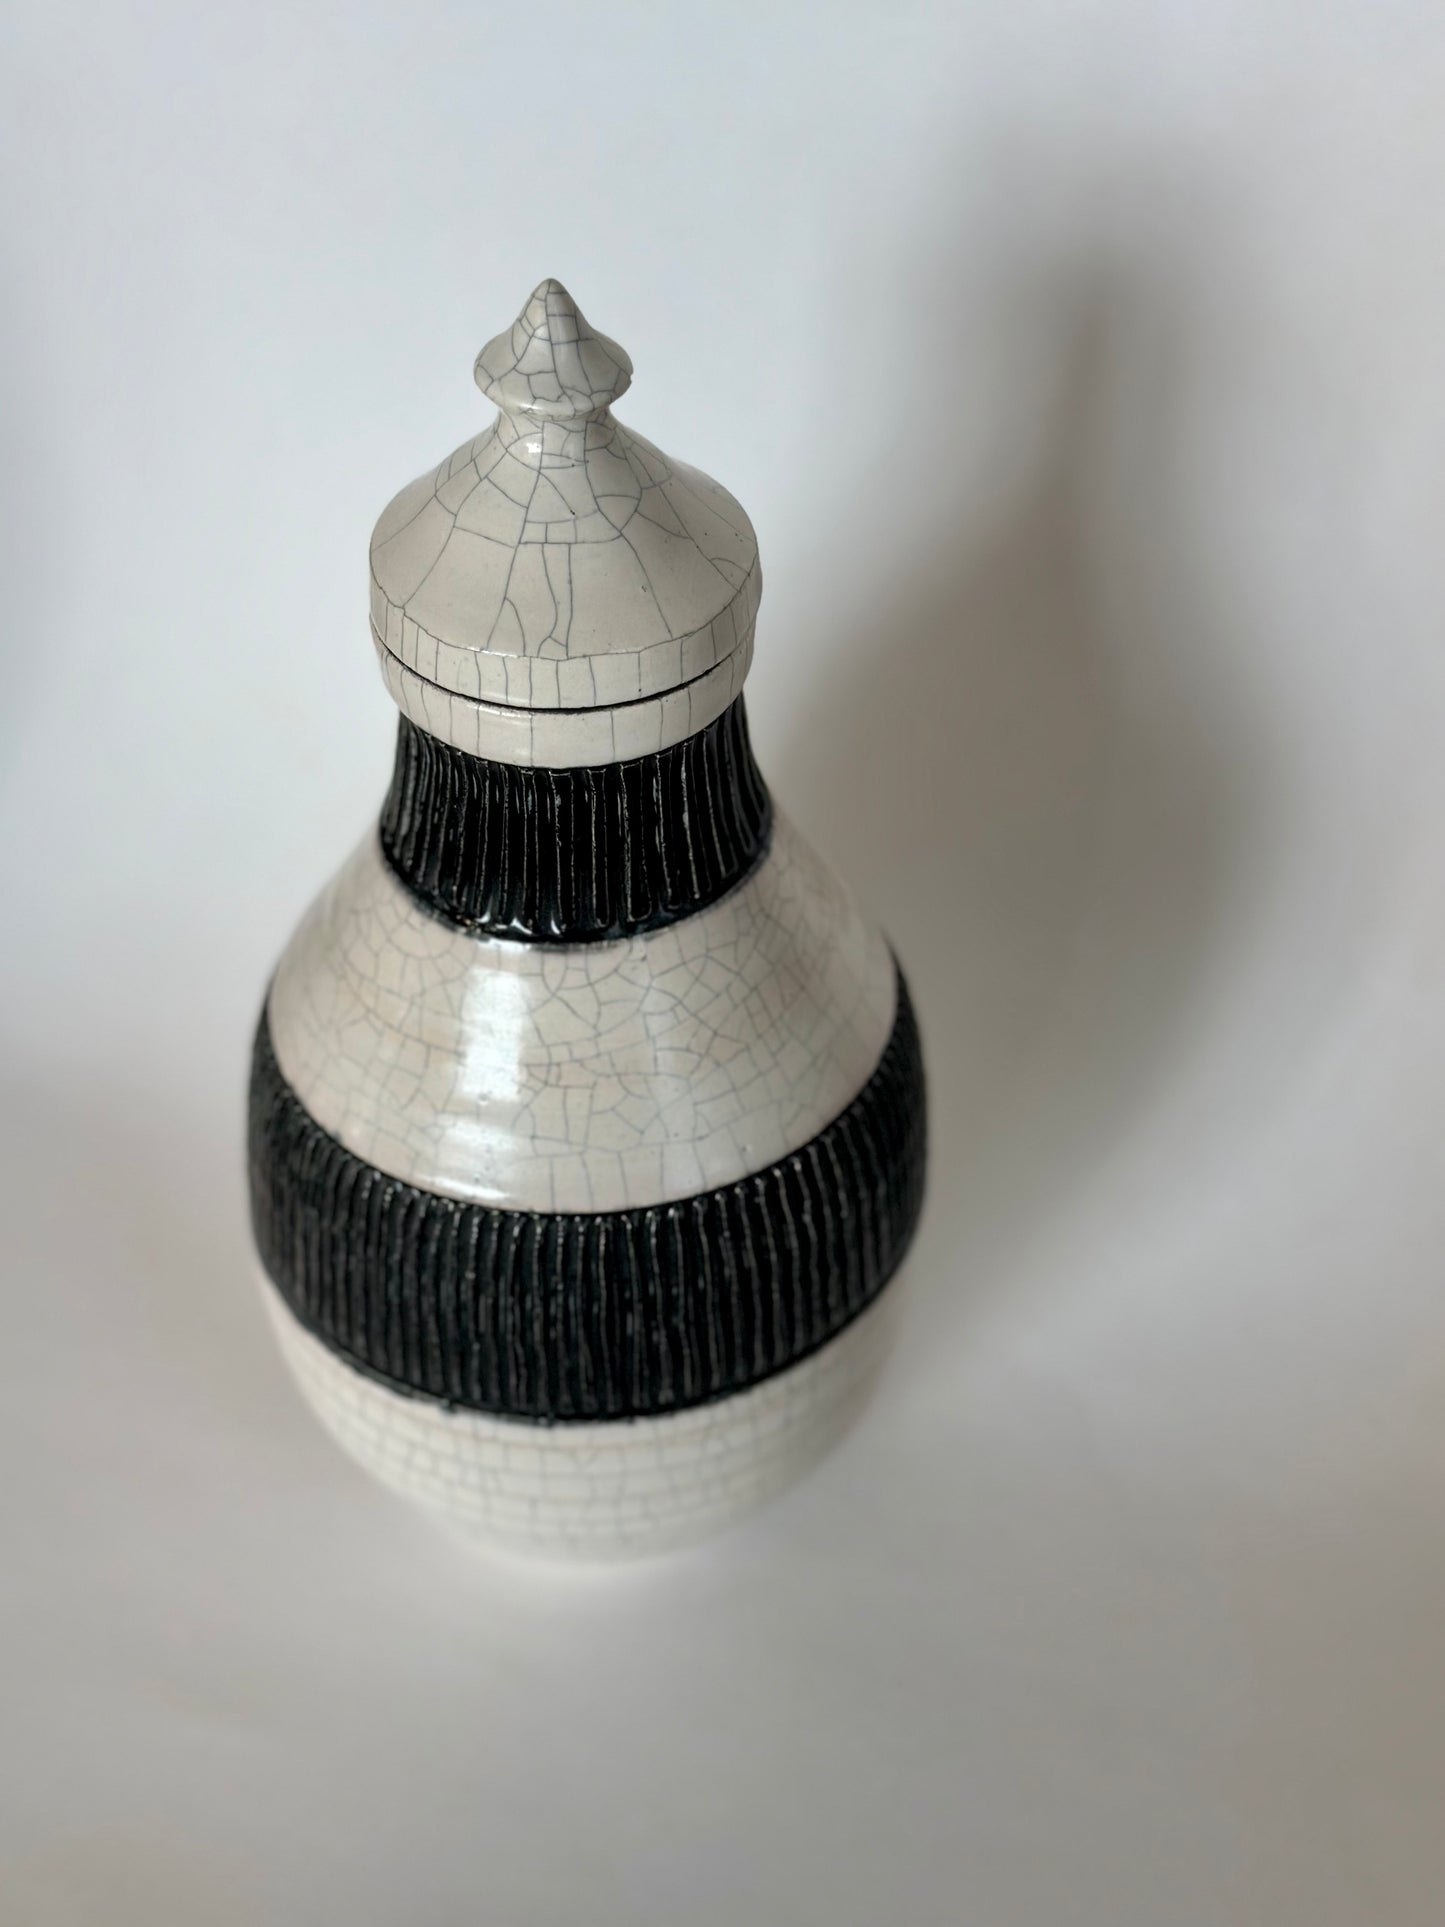 White Crackle Lidded Vessel | Pottery by Mike